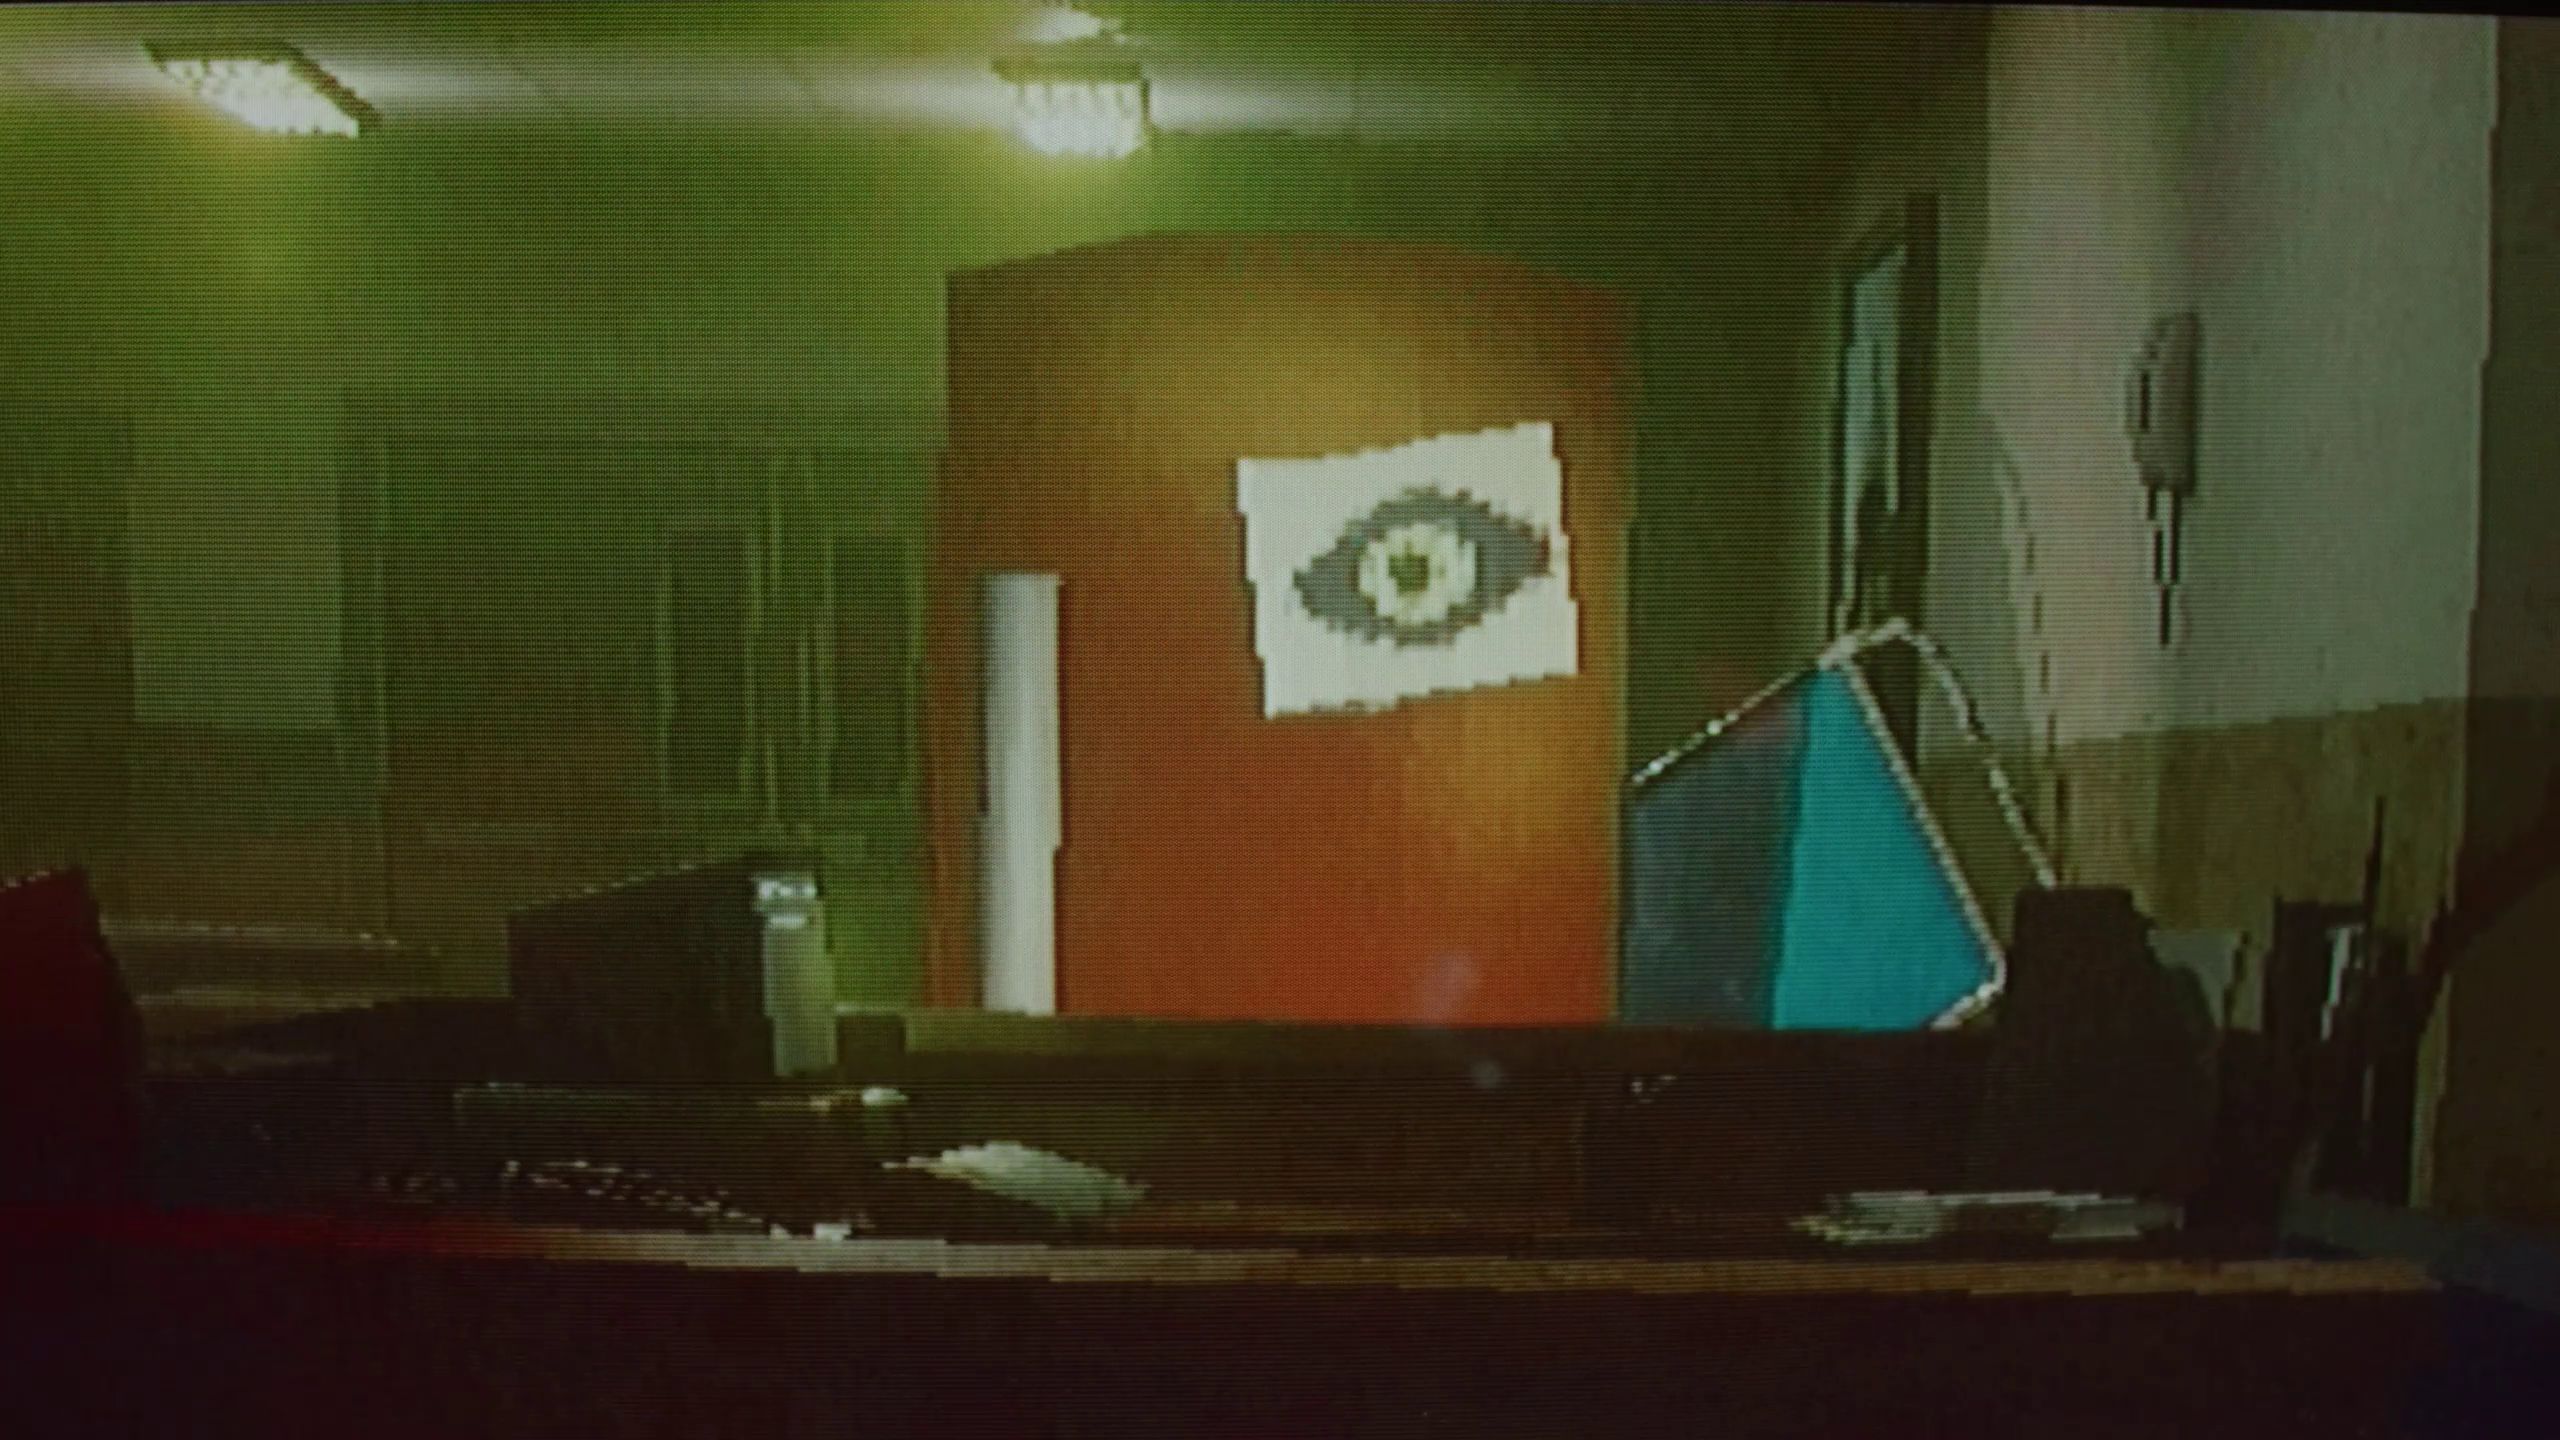 A red fridge with an A4 paper with an eye drawn on it stuck on the door, standing in what appears to be a hospital waiting room